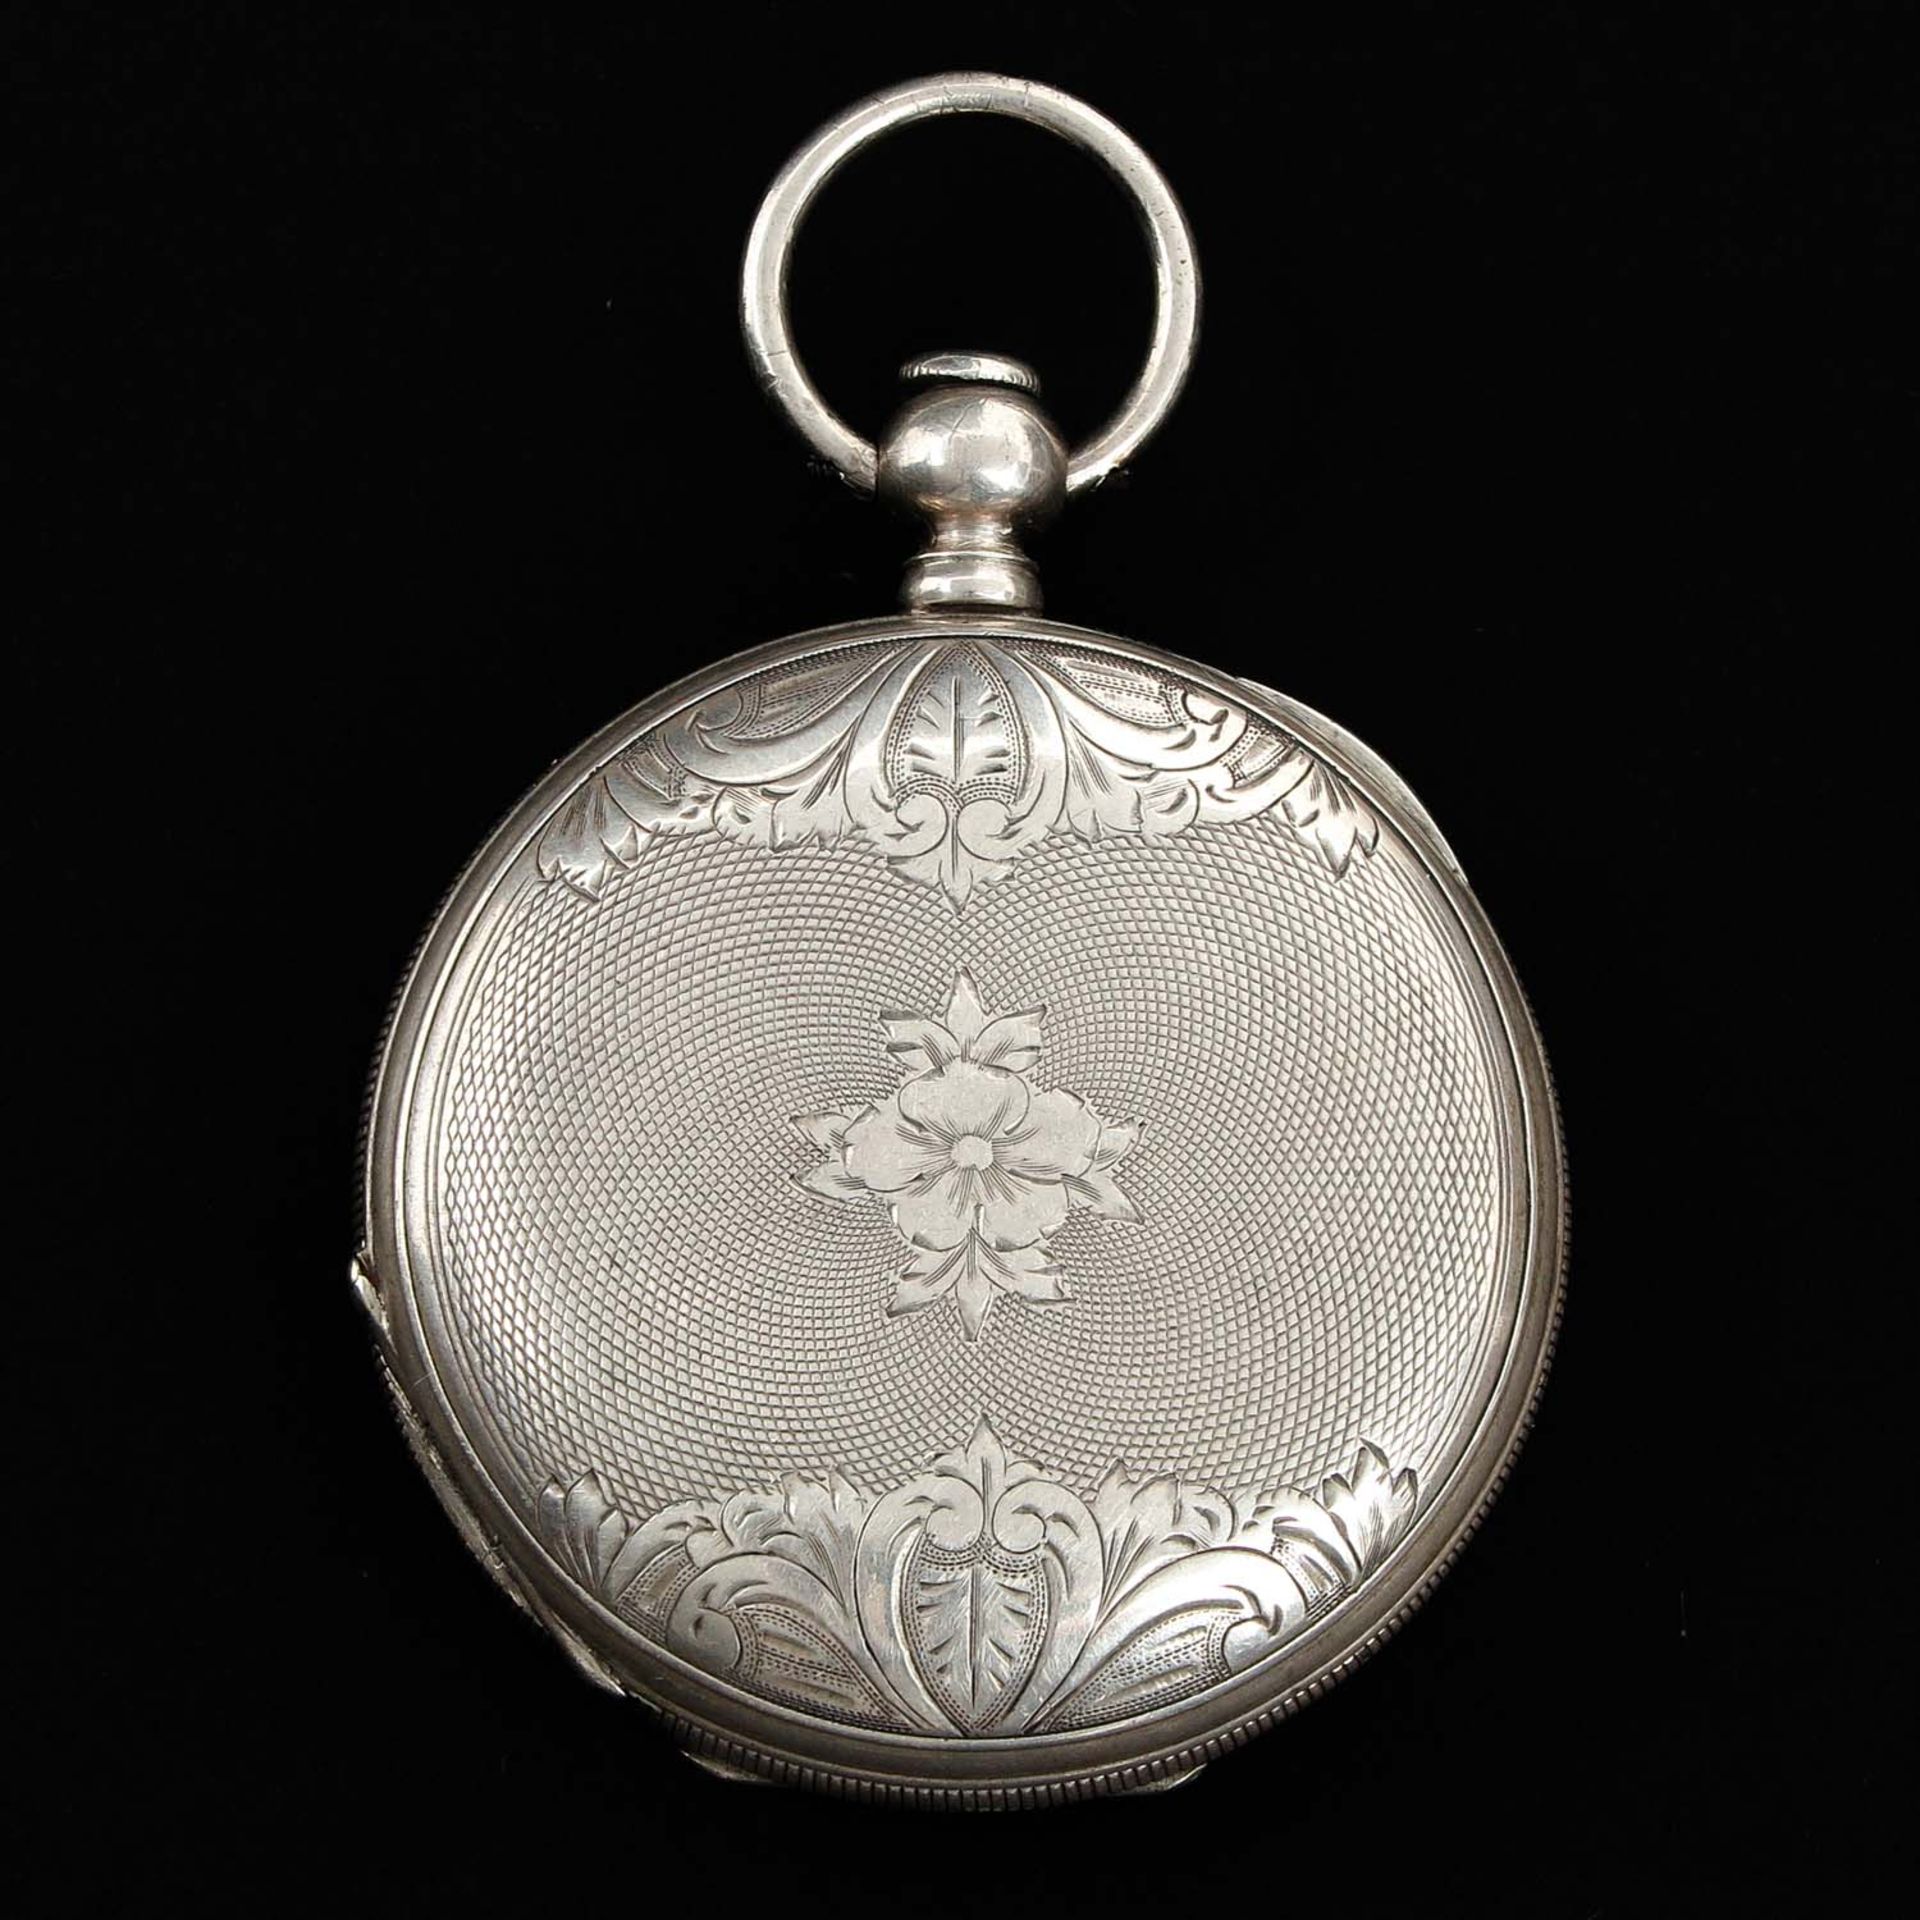 A Pocket Watch by Jacot & Son - Image 3 of 8